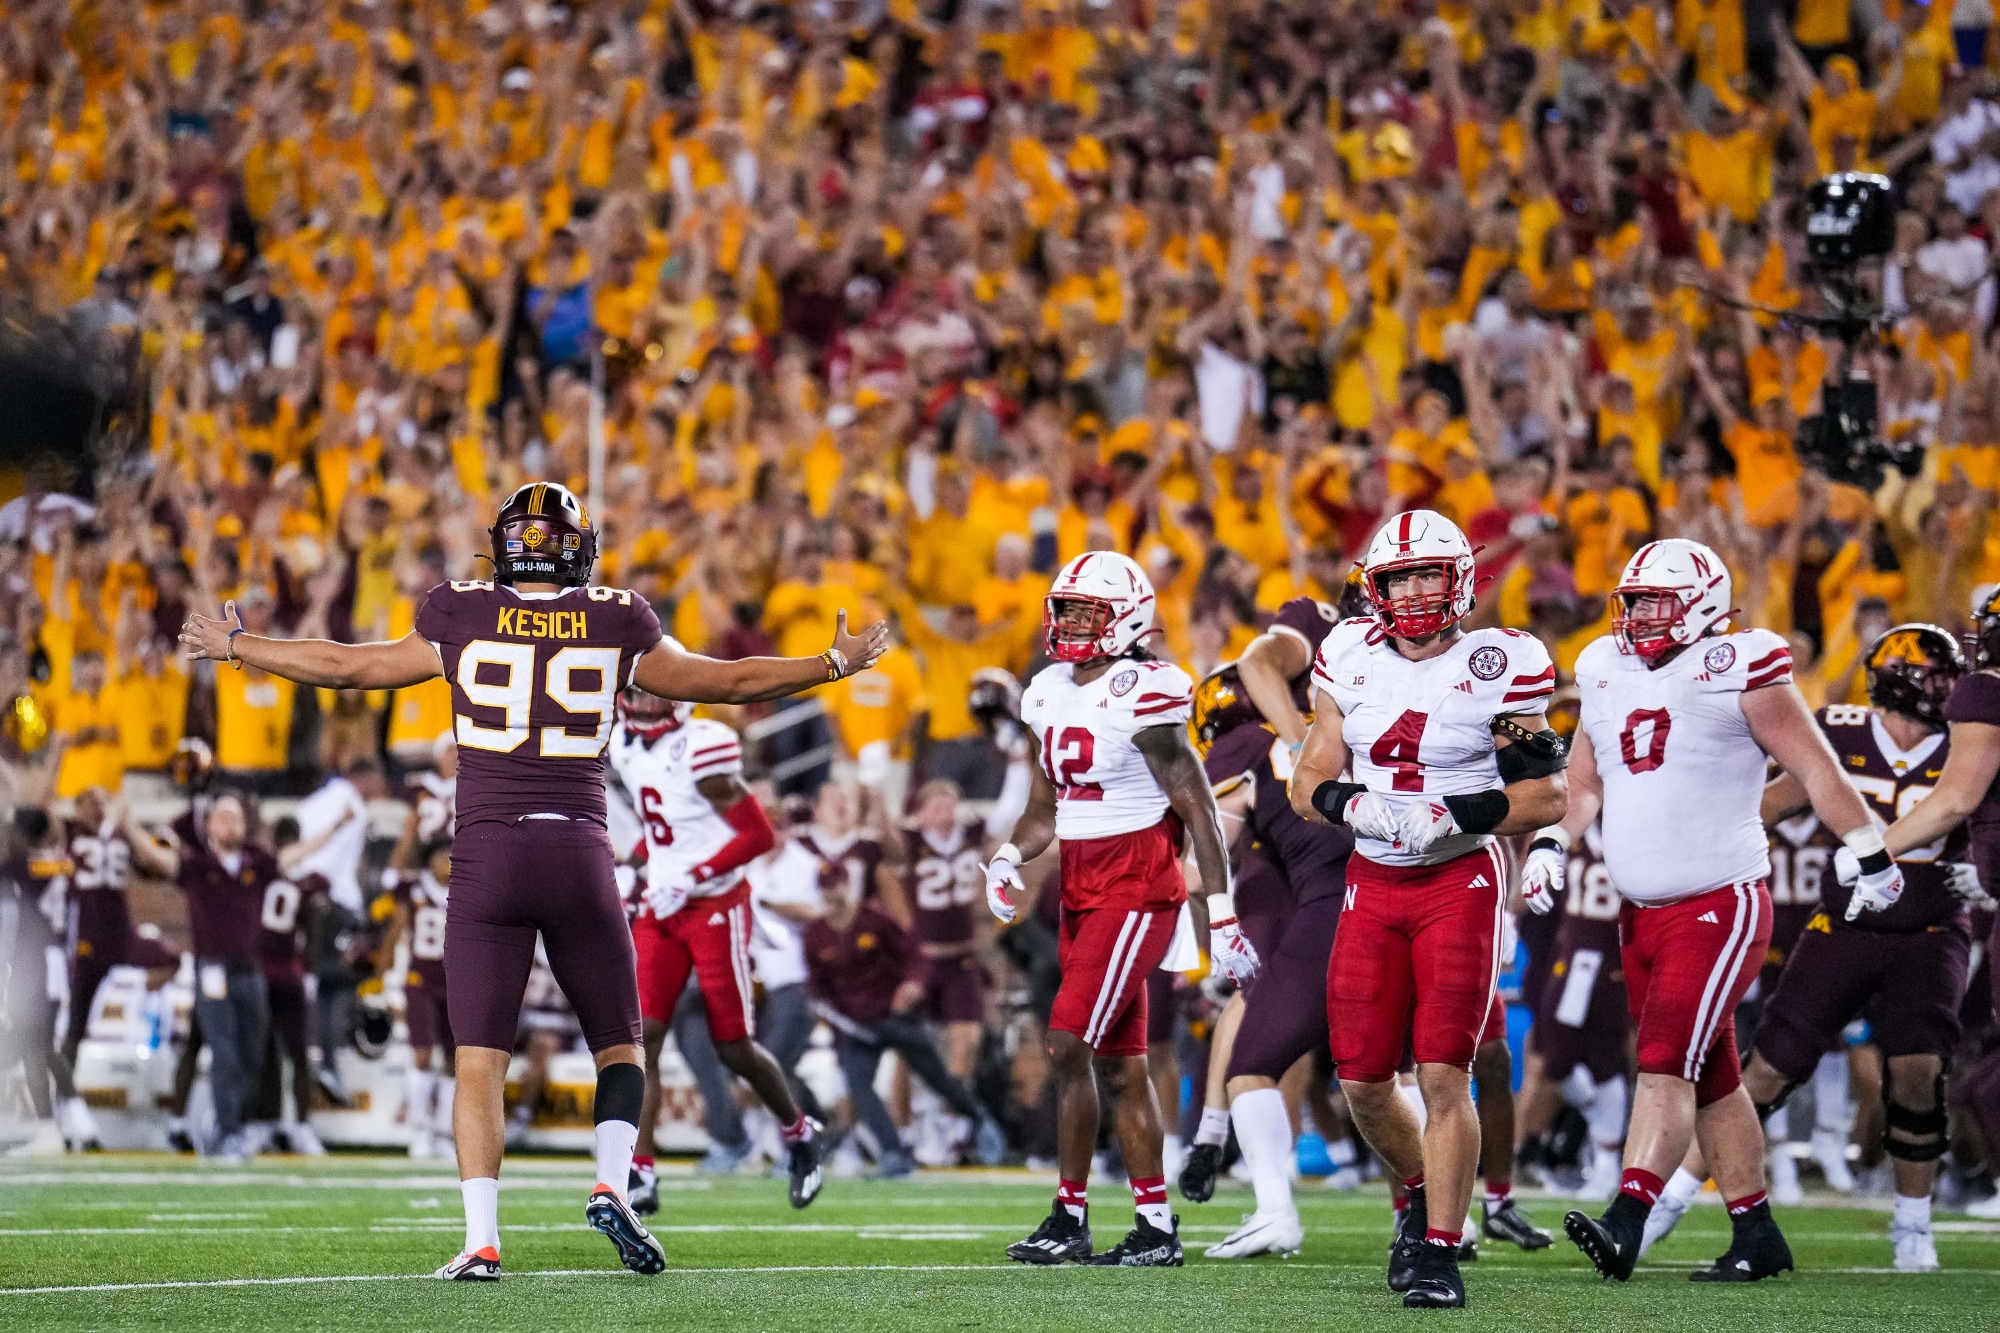 Two Gopher football players win Big Ten honors